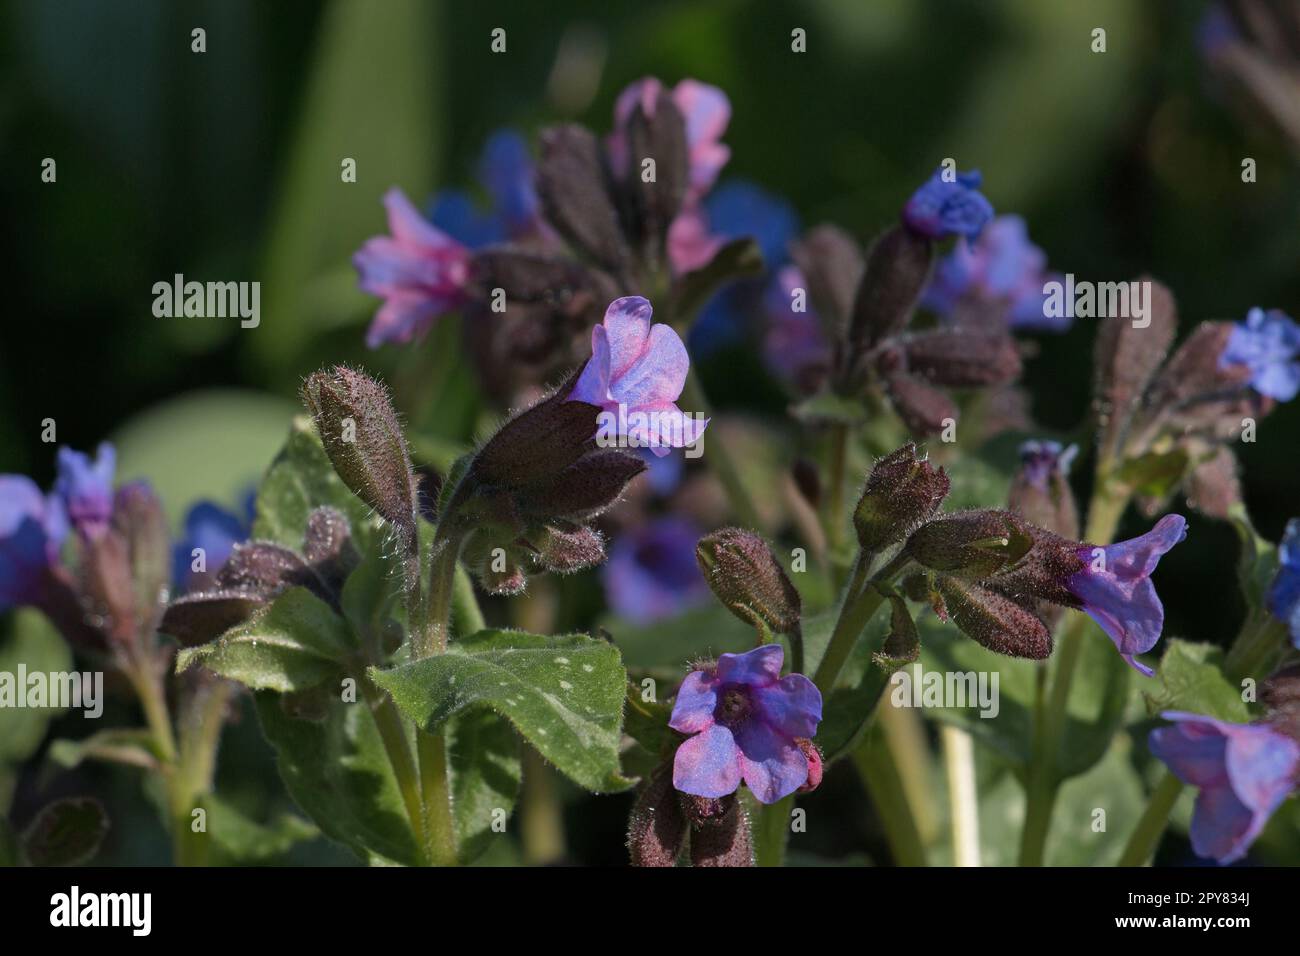 Blue, pink and purple lungwort flowers, Pulmonaria saccharata ‘Mrs Moon’ or Bethlehem sage with variegated leaves, blooming in springtime Stock Photo